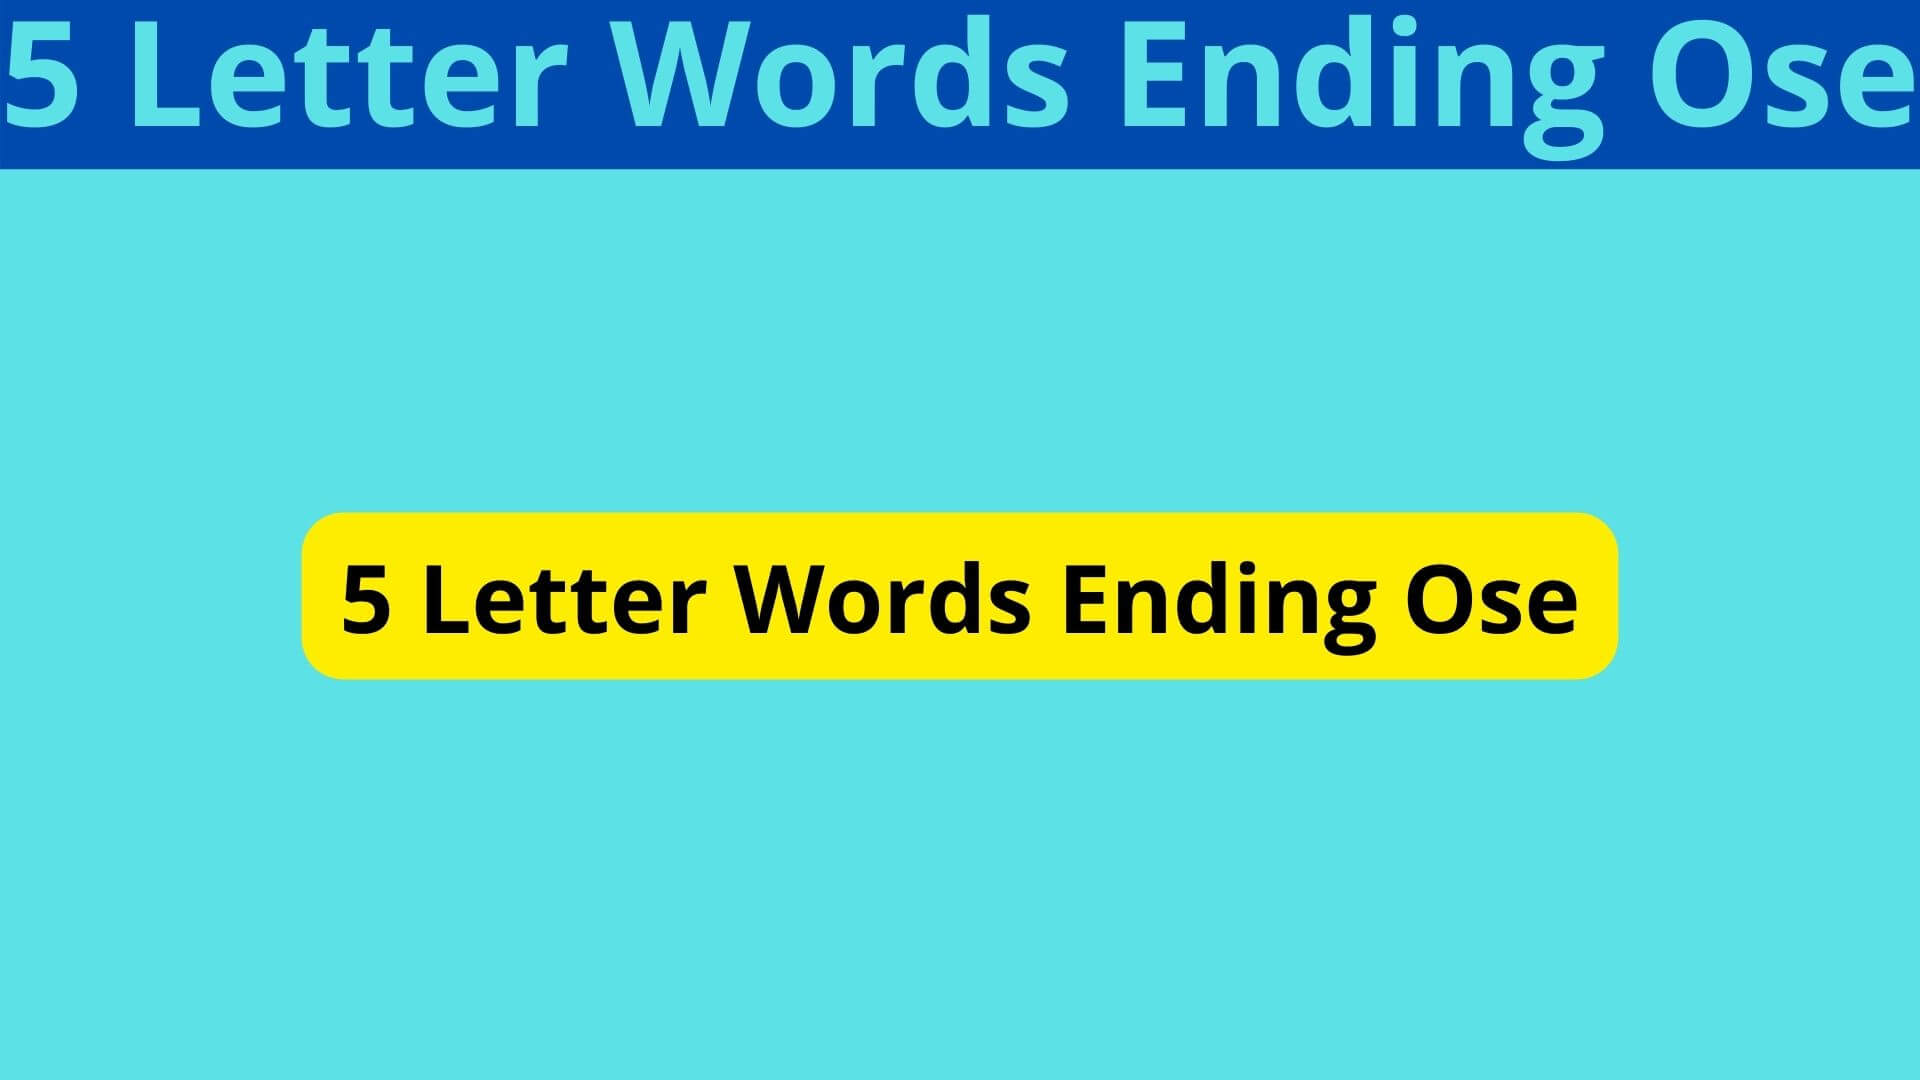 5-letter-words-ending-ose-june-2022-know-all-the-details